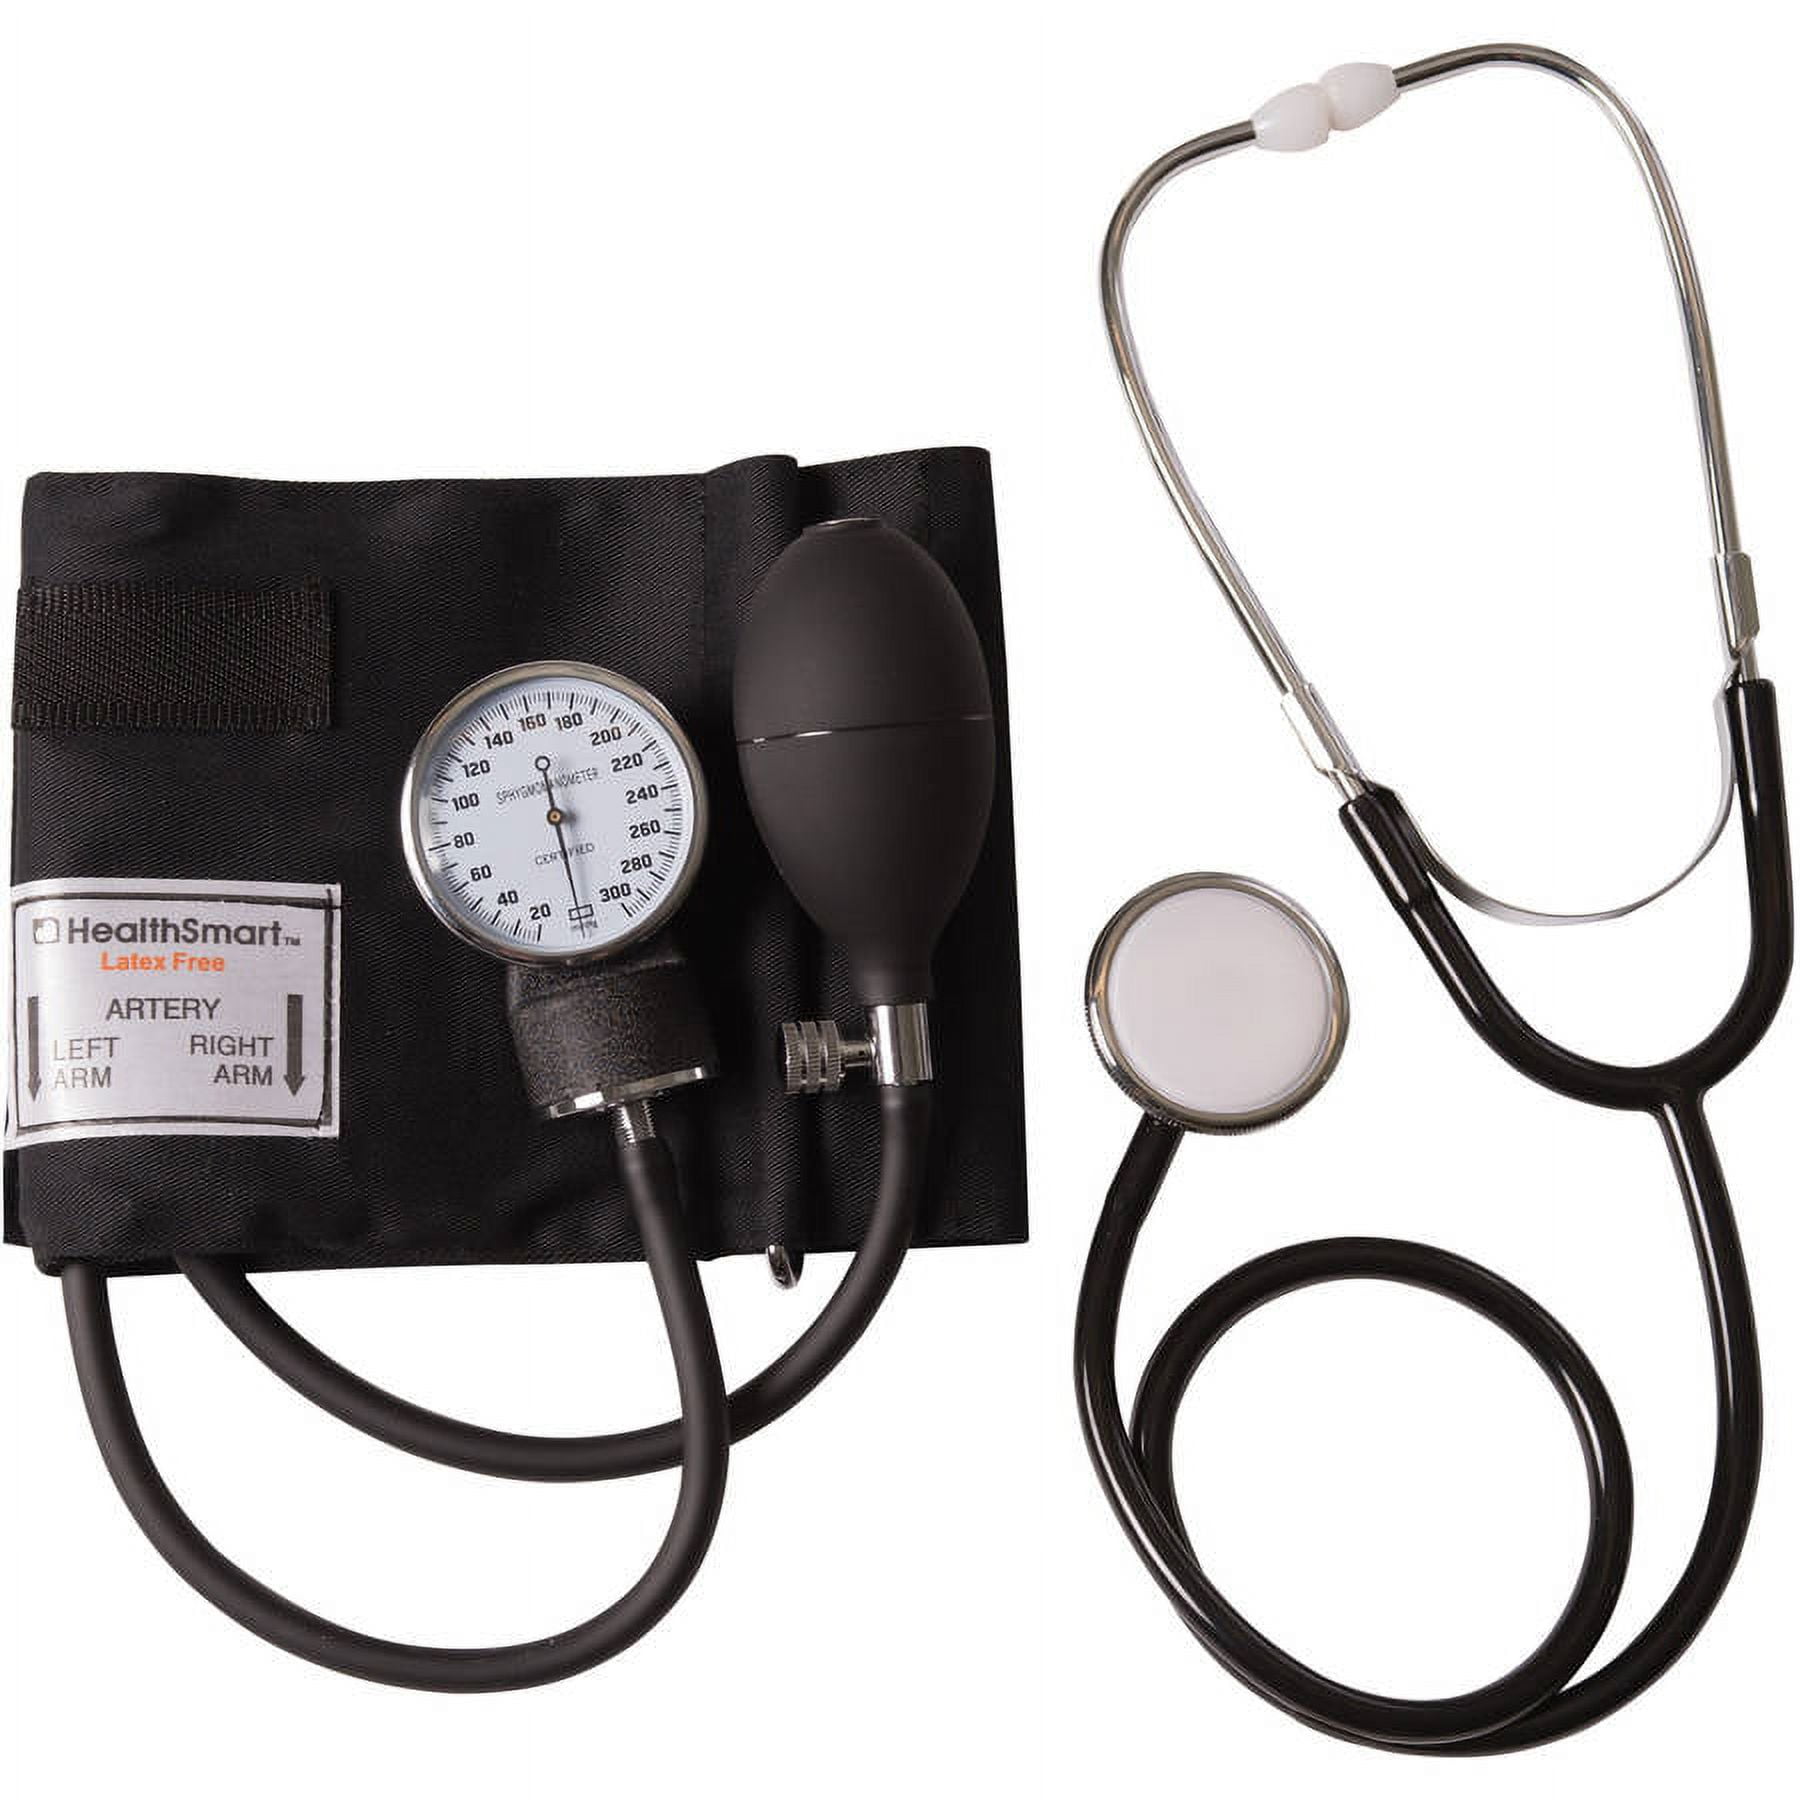 HCS Manual Extra Large Blood Pressure Cuff - Aneroid Sphygmomanometer, x Large Adult - Medical, in-Home, Elderly Care - Arm BP Cuff Manual - Monitor